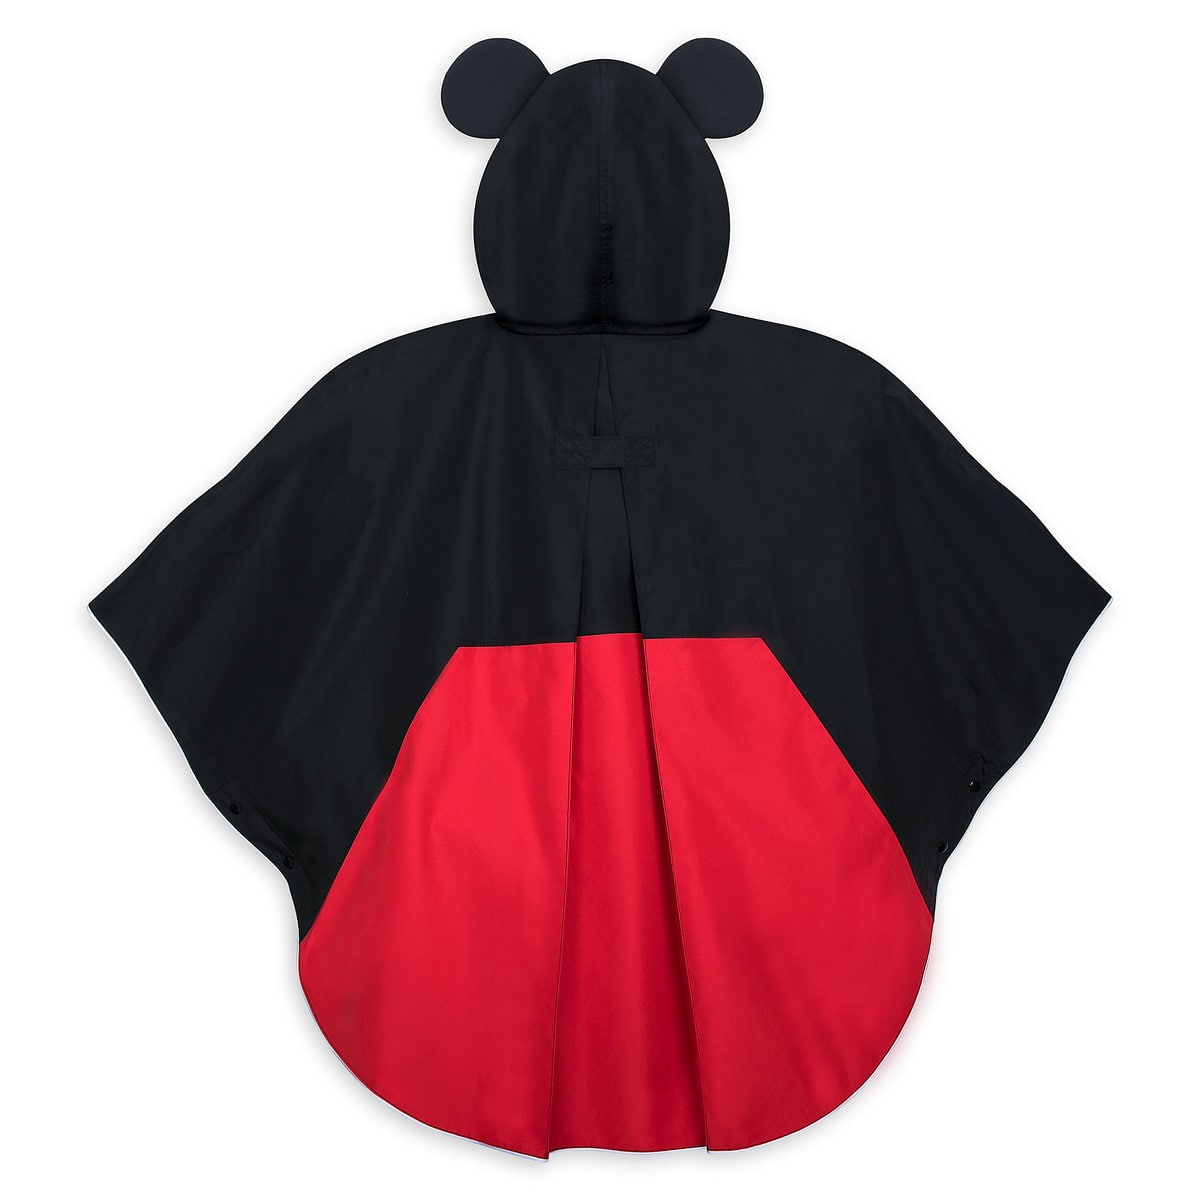 Disney Parks Mickey Mouse Rain Poncho for Adults Size XS-S New with Tags